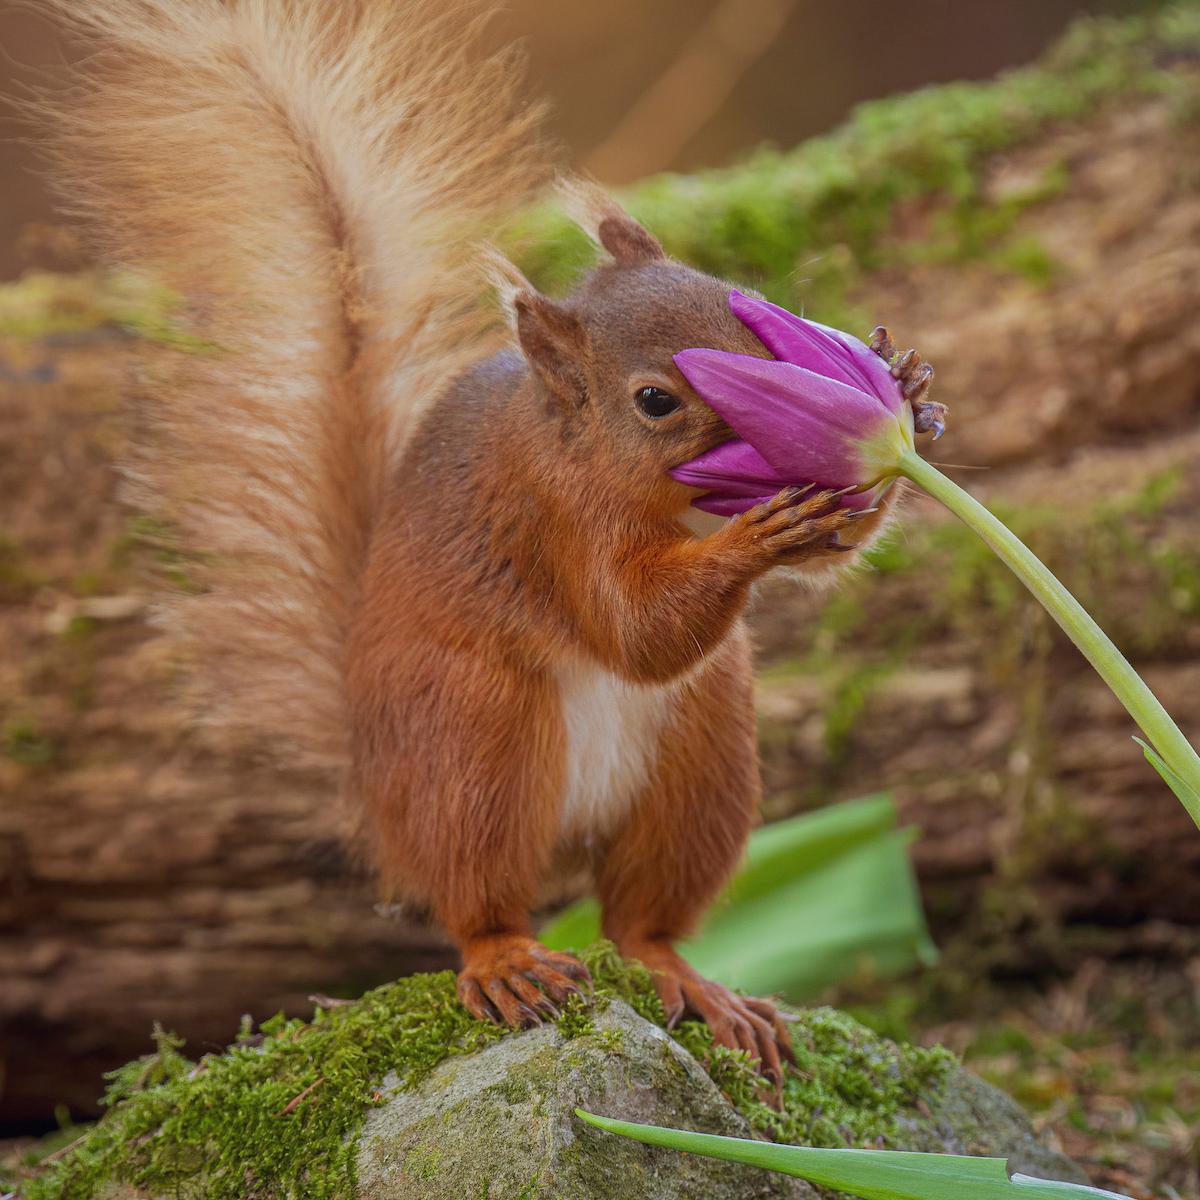 A red squirrel sniffs a flower in this photo by David Robertshaw. (Courtesy of <a href="https://www.instagram.com/yorkshireimages">David Robertshaw Photography</a>)